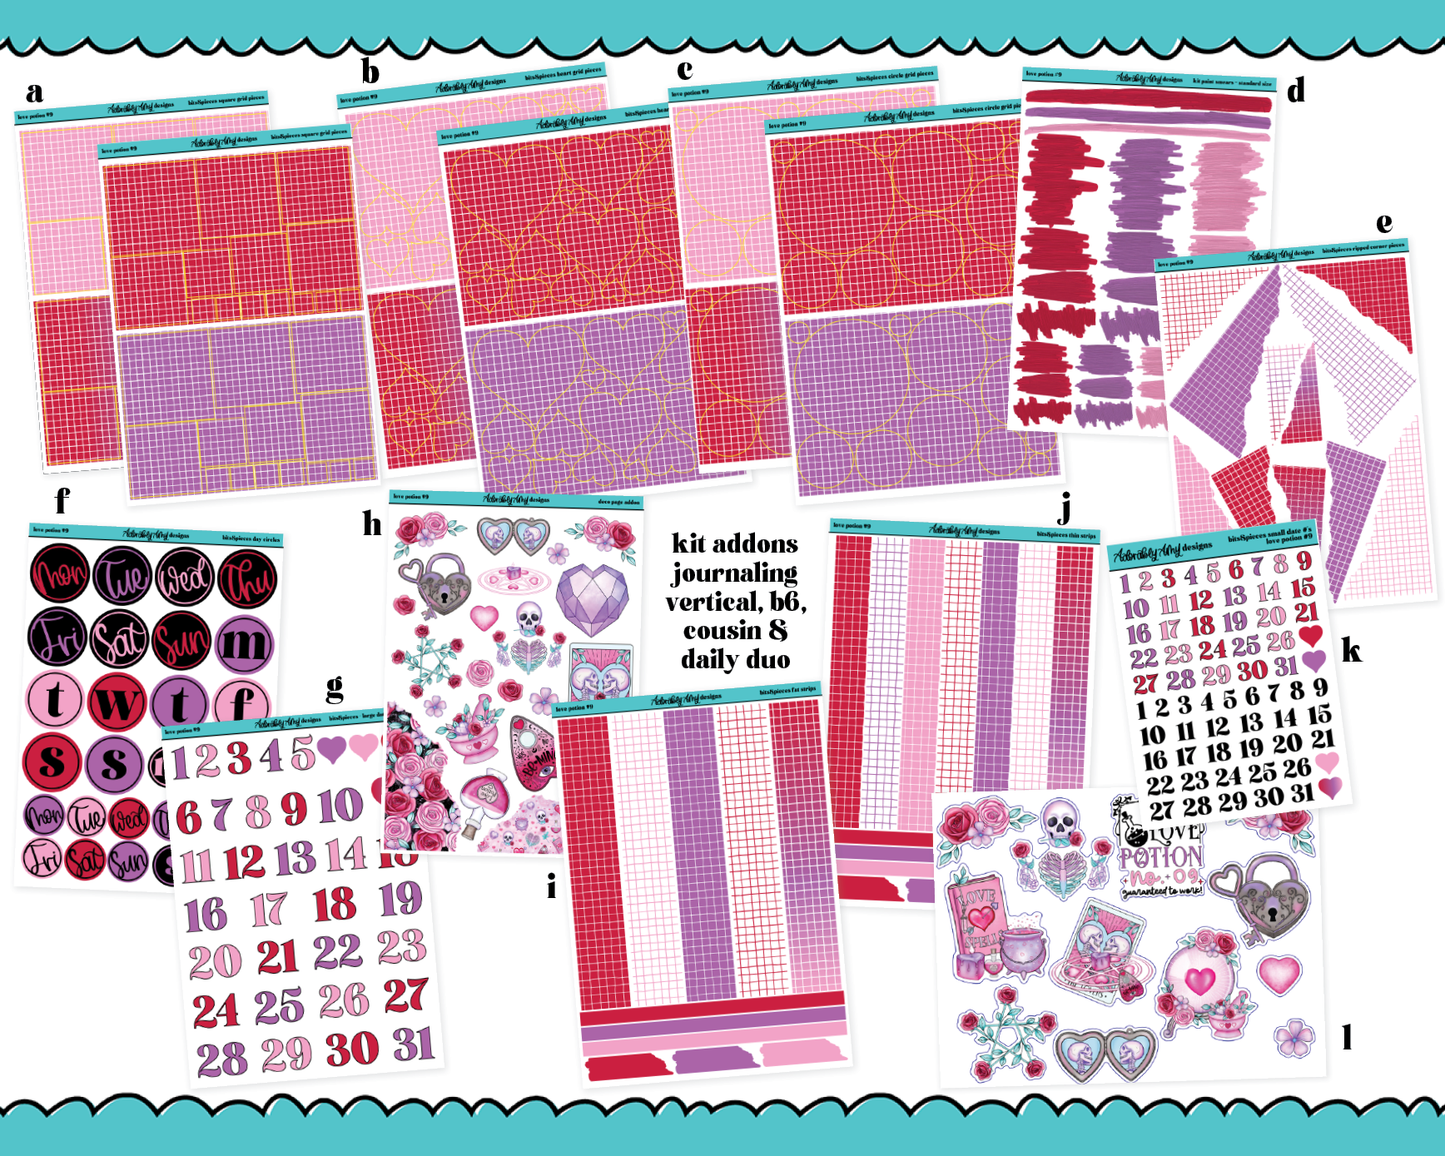 Love Potion #9 Weekly Kit Addons - All Sizes - Deco, Smears and More!